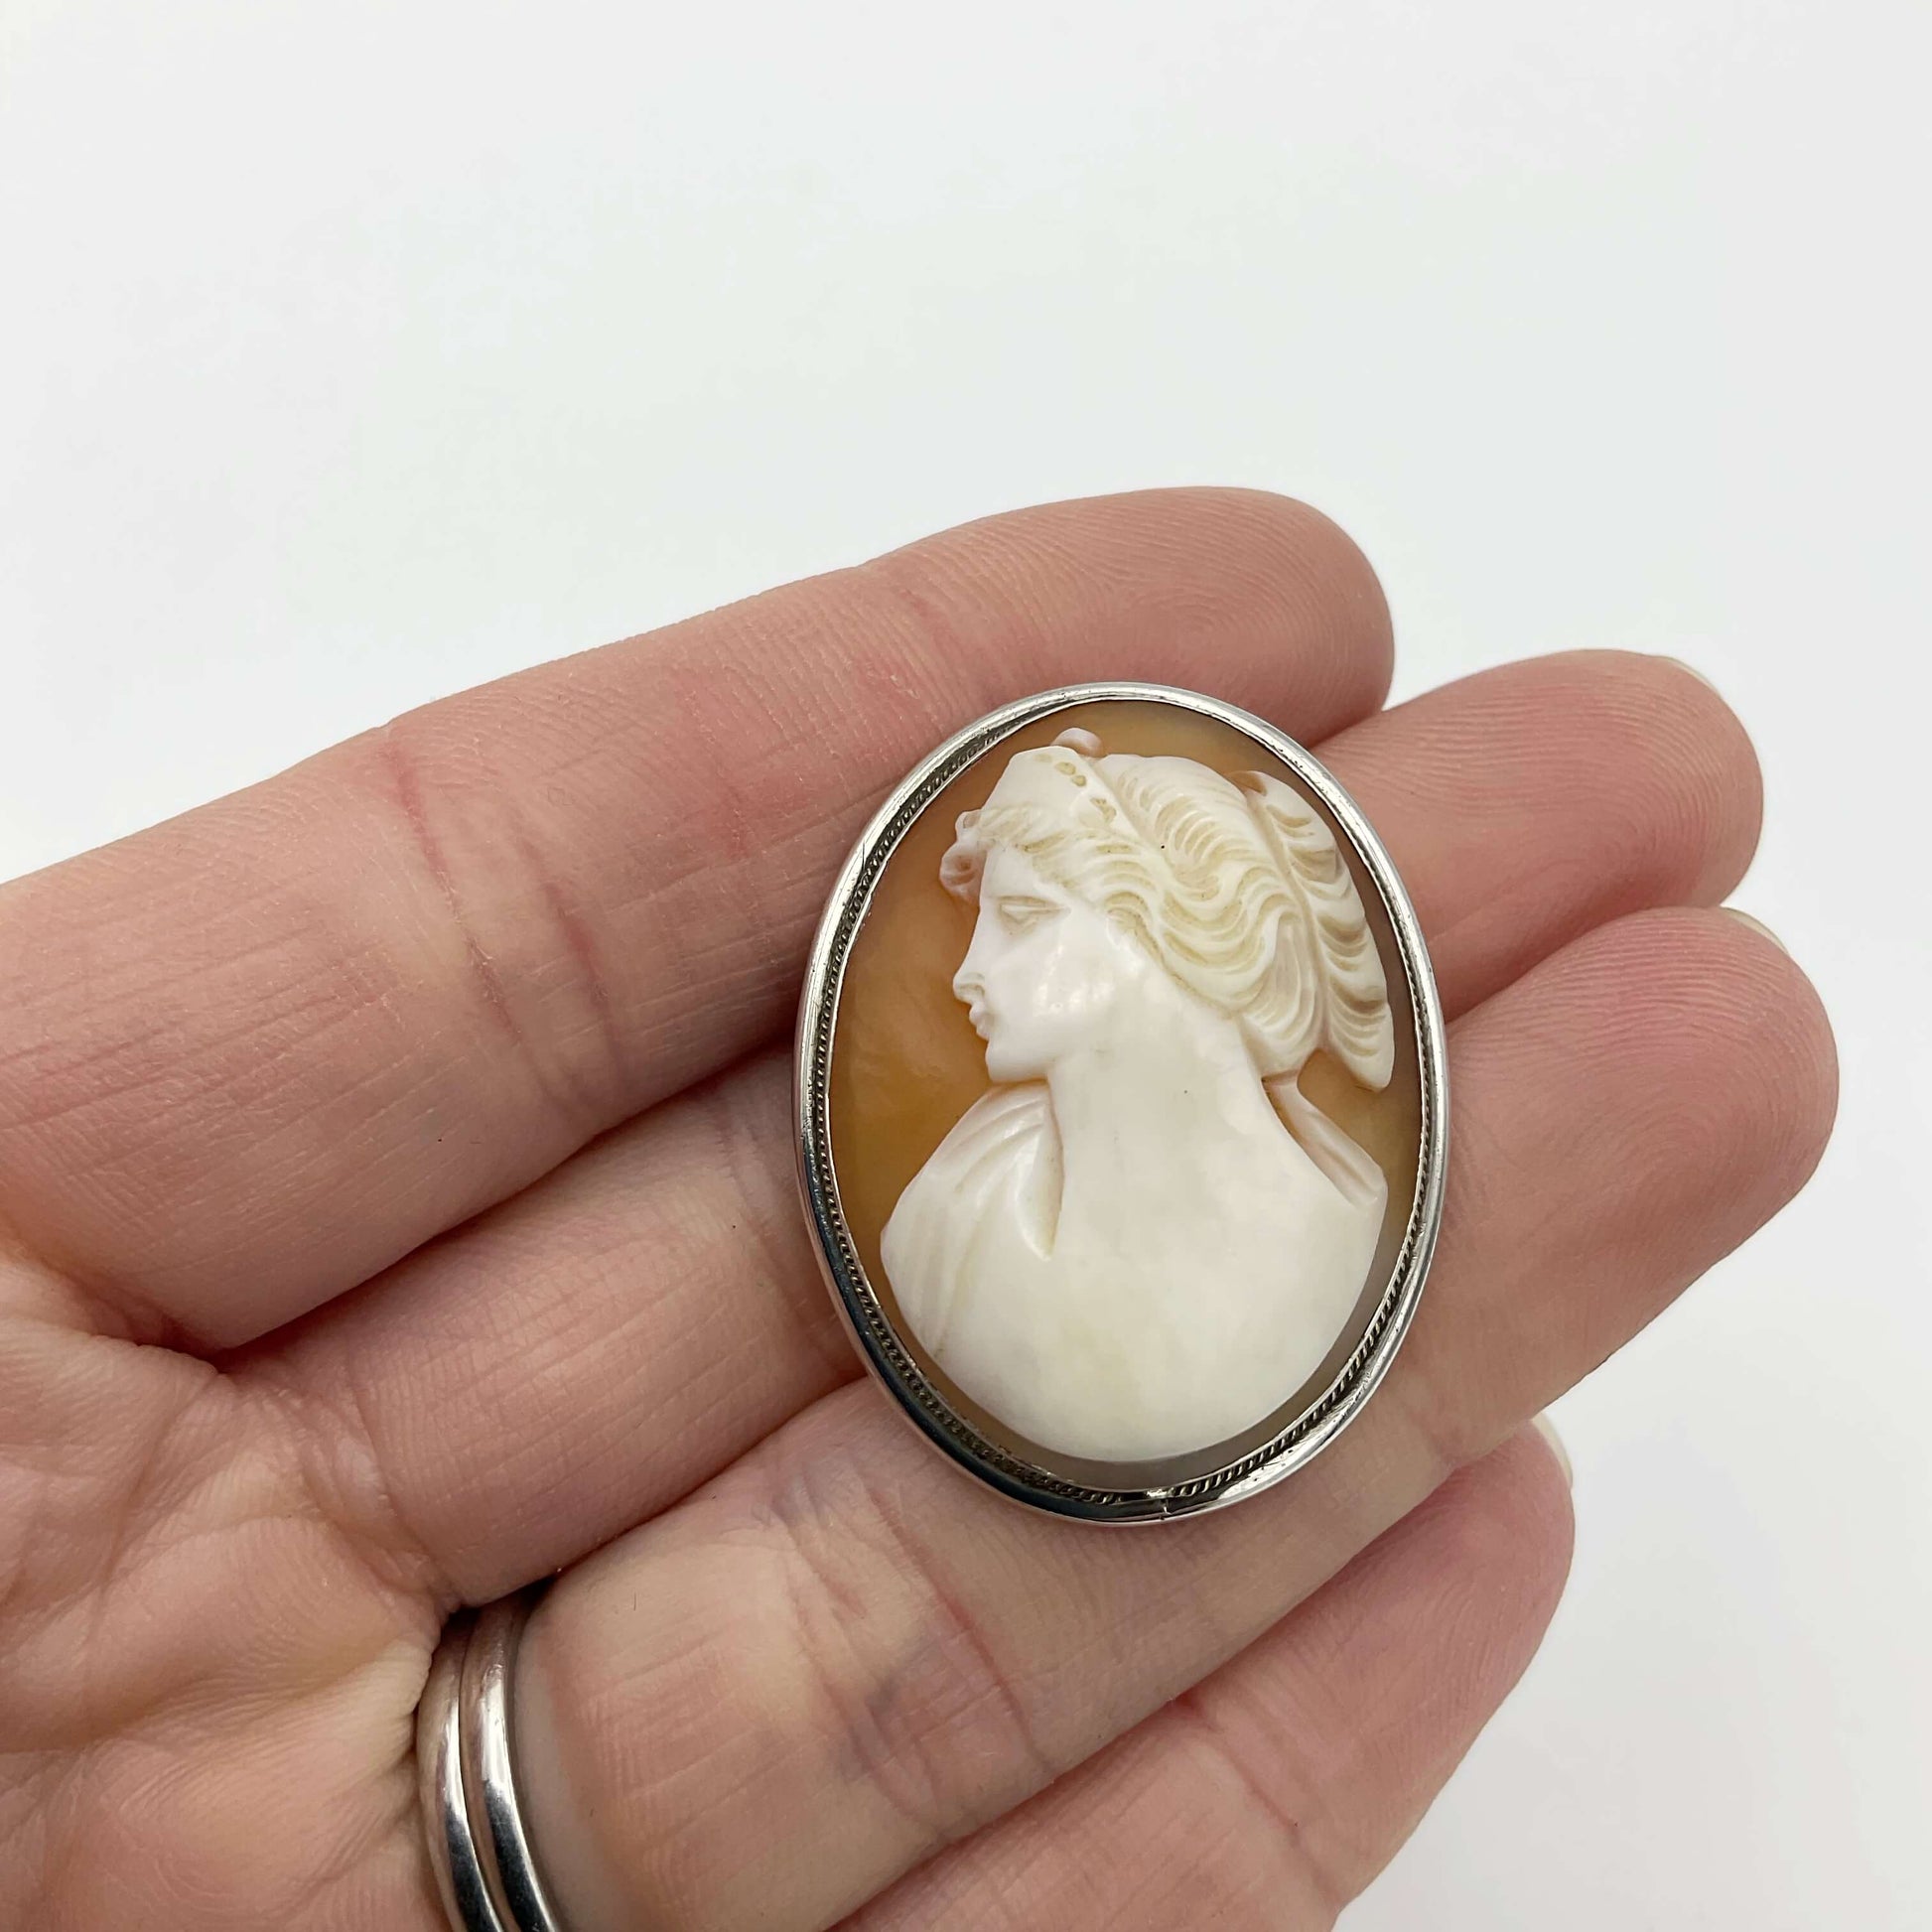 Cameo Silver Brooch held in a hand